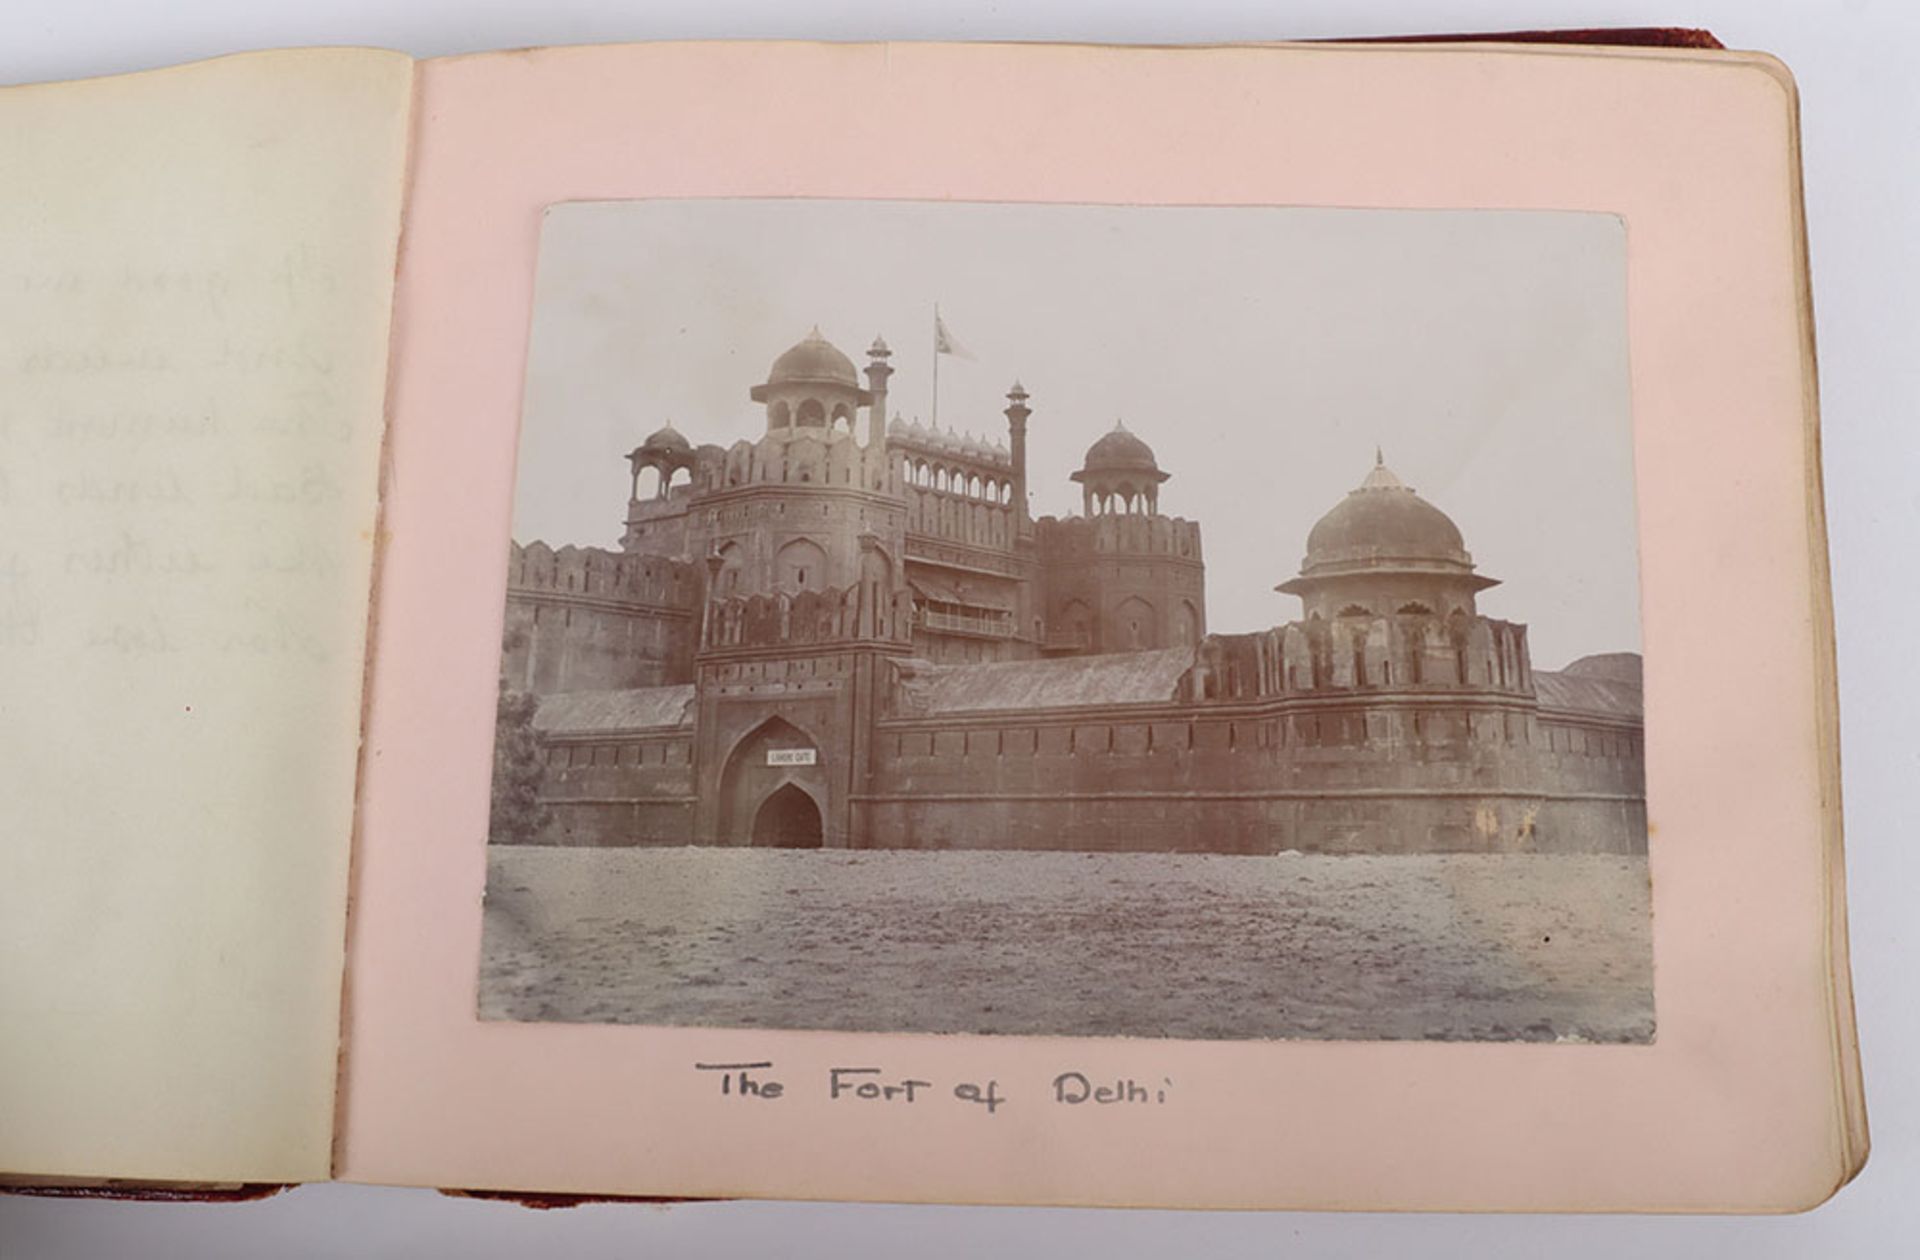 Photograph Album with images of ther Delhi Durbar, troops lining streets, Elephants, sacred cows bel - Image 20 of 48